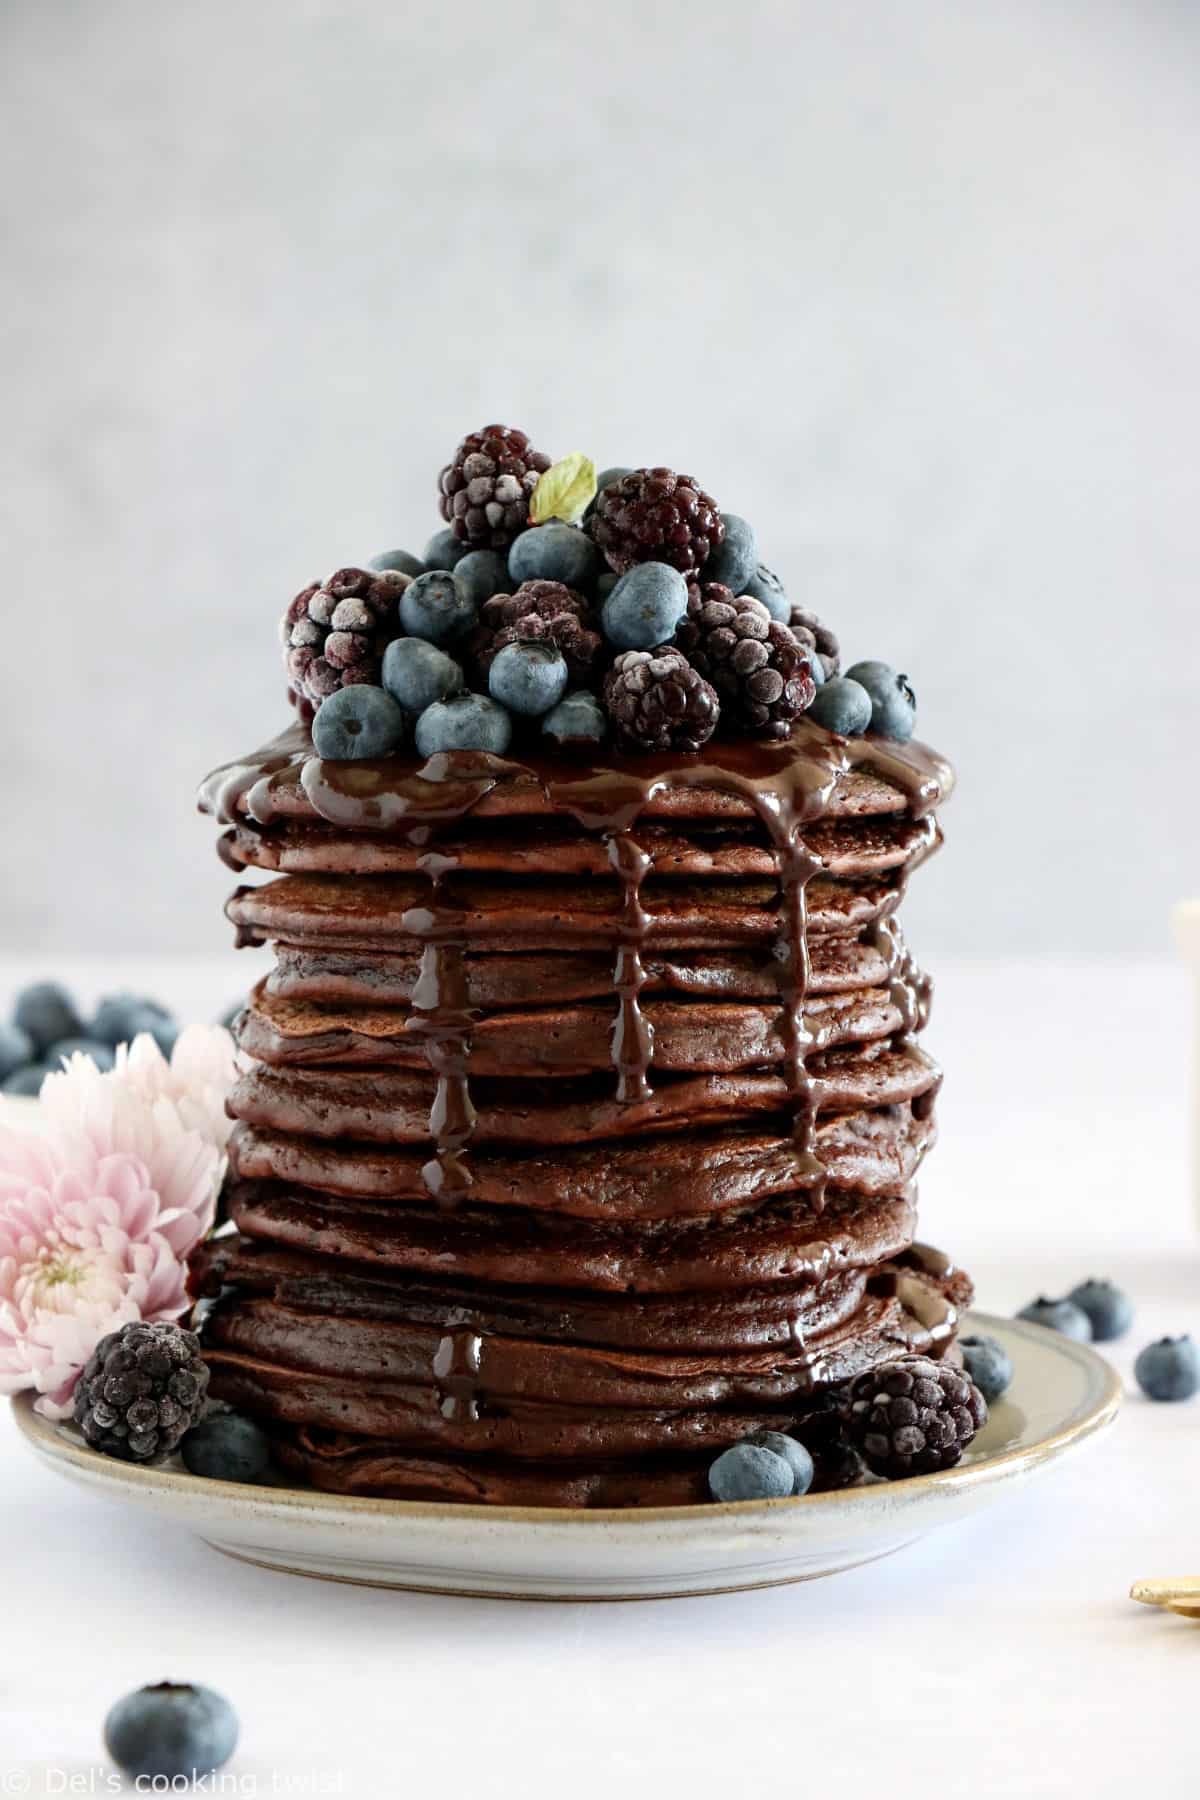 Perfect Chocolate Pancakes (with chocolate sauce) - Del's cooking twist